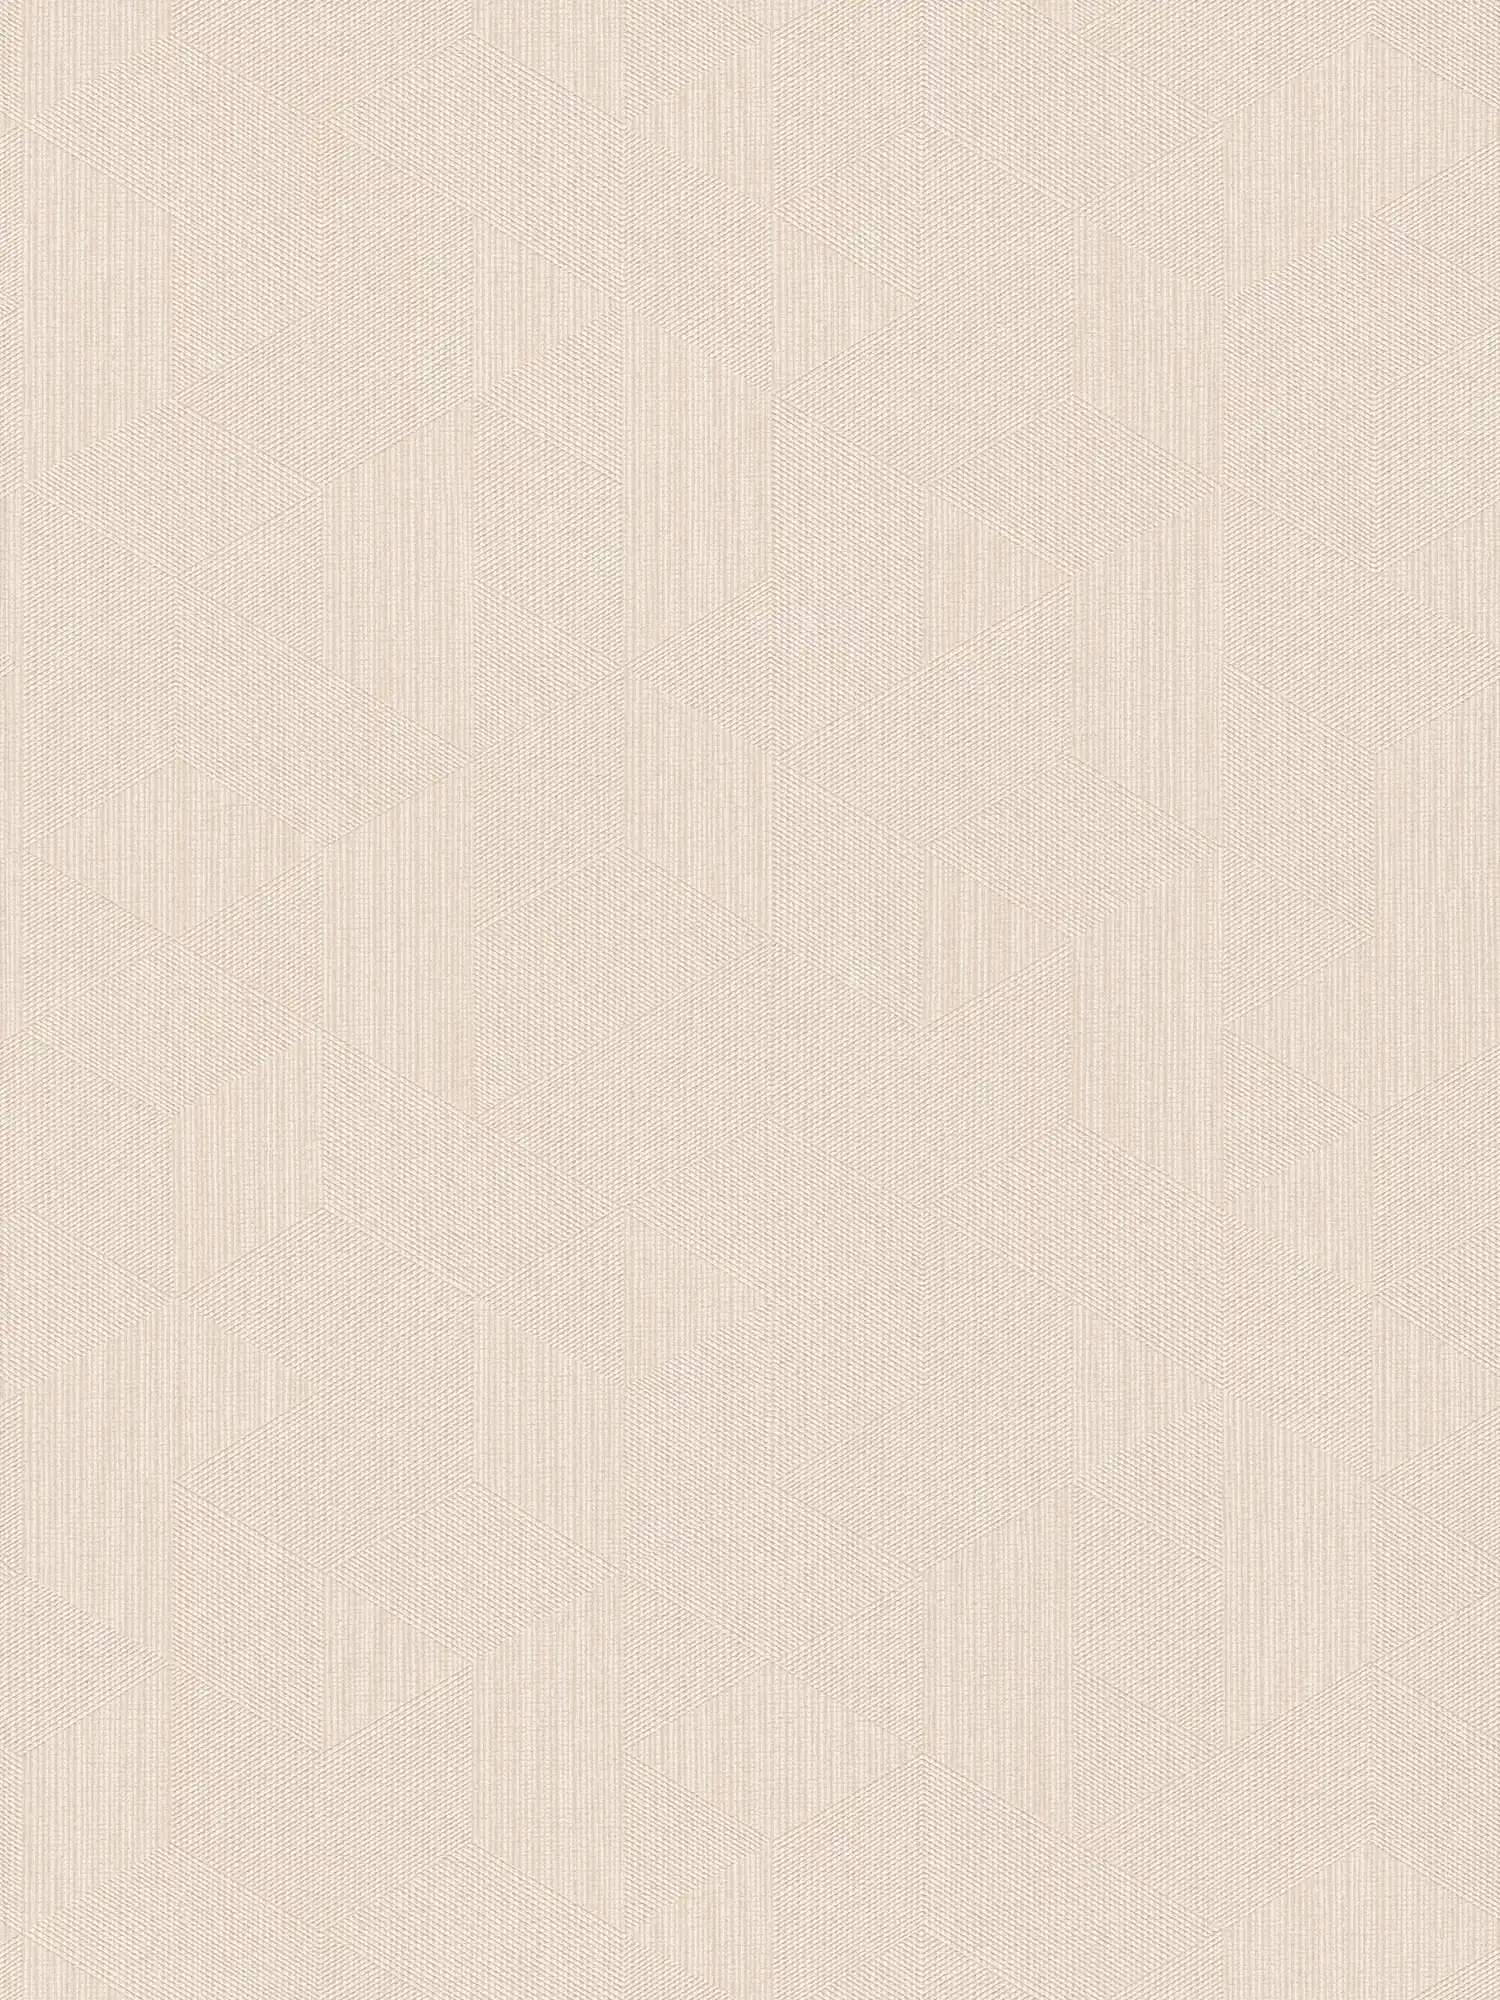 Light beige wallpaper non-woven with graphic pattern & shimmer effect - beige
